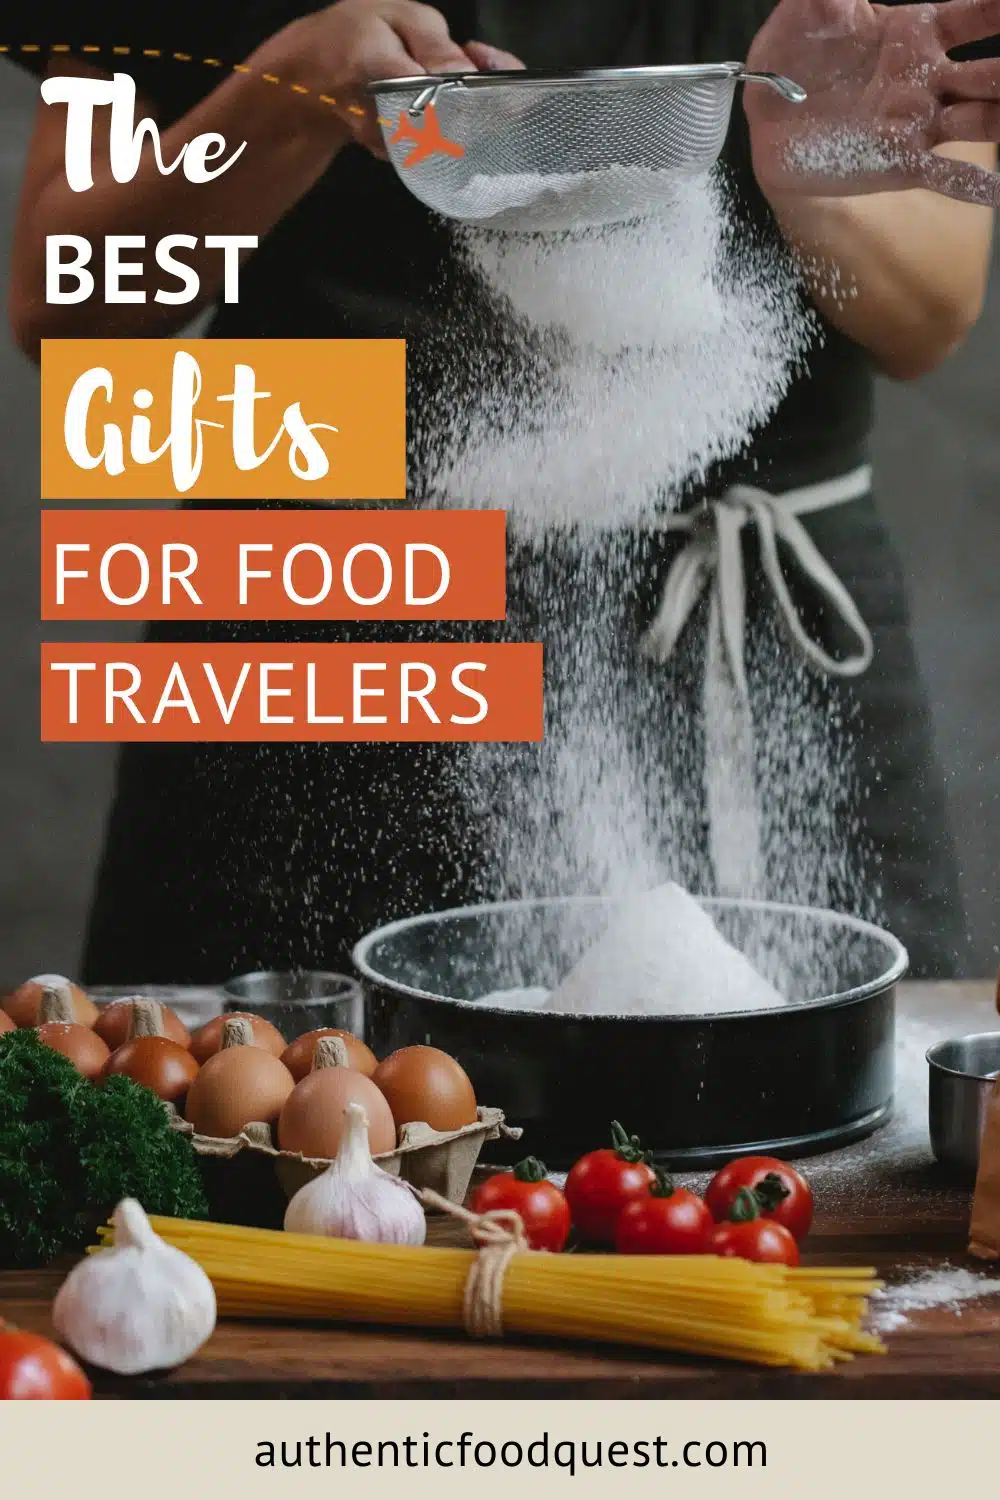 Food Tours Make Great Gifts